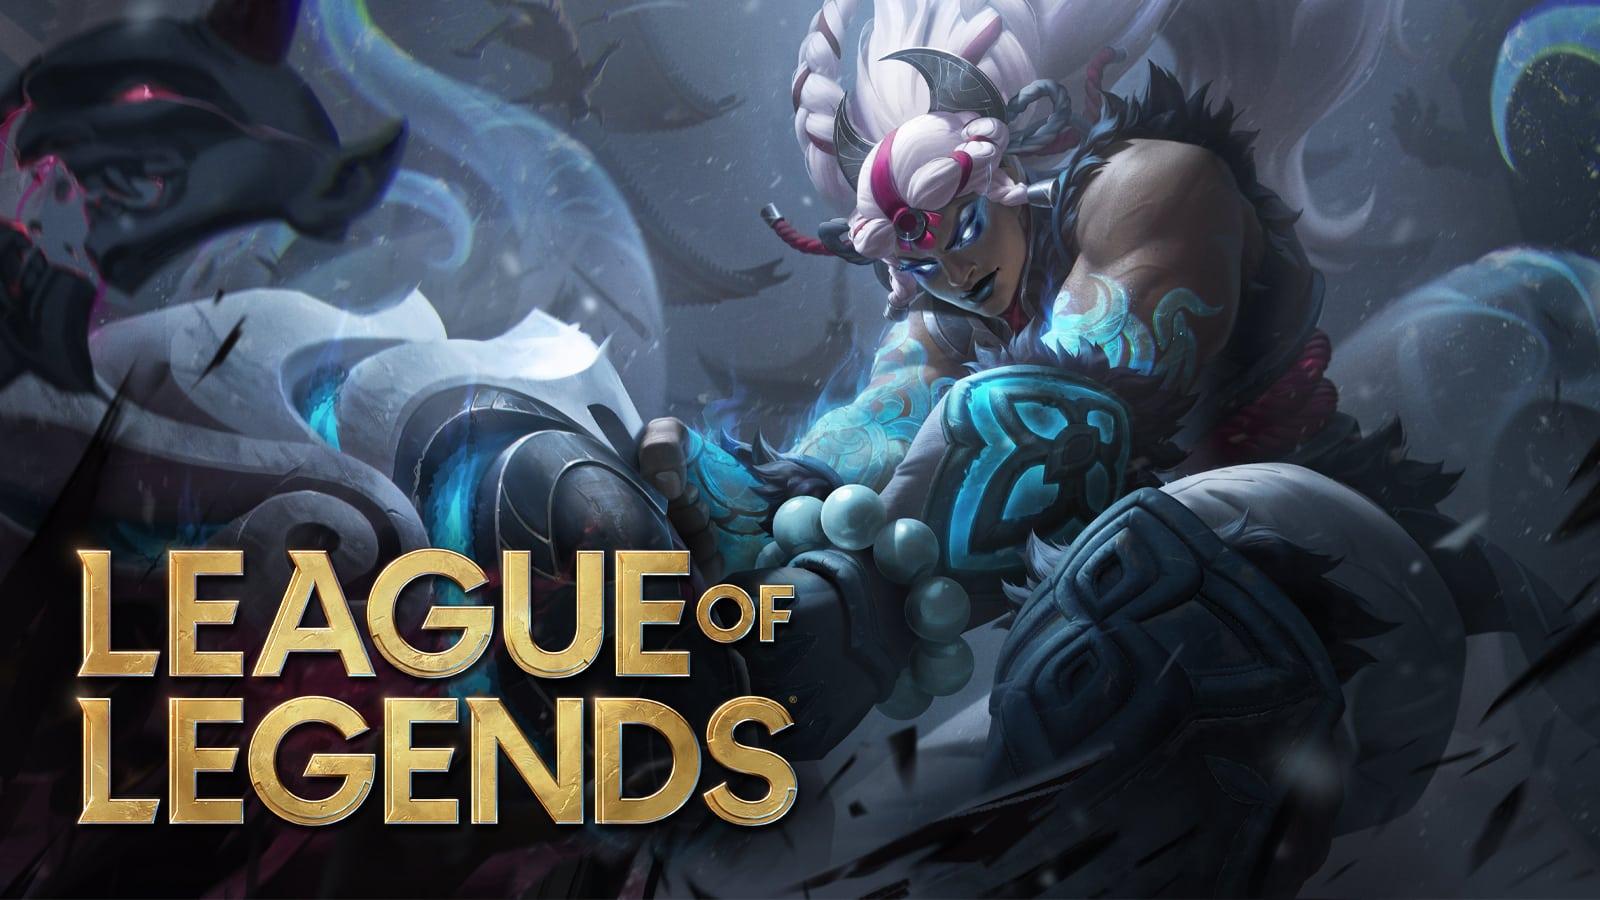 Sona main with 65 percent win rate becomes first Challenger player